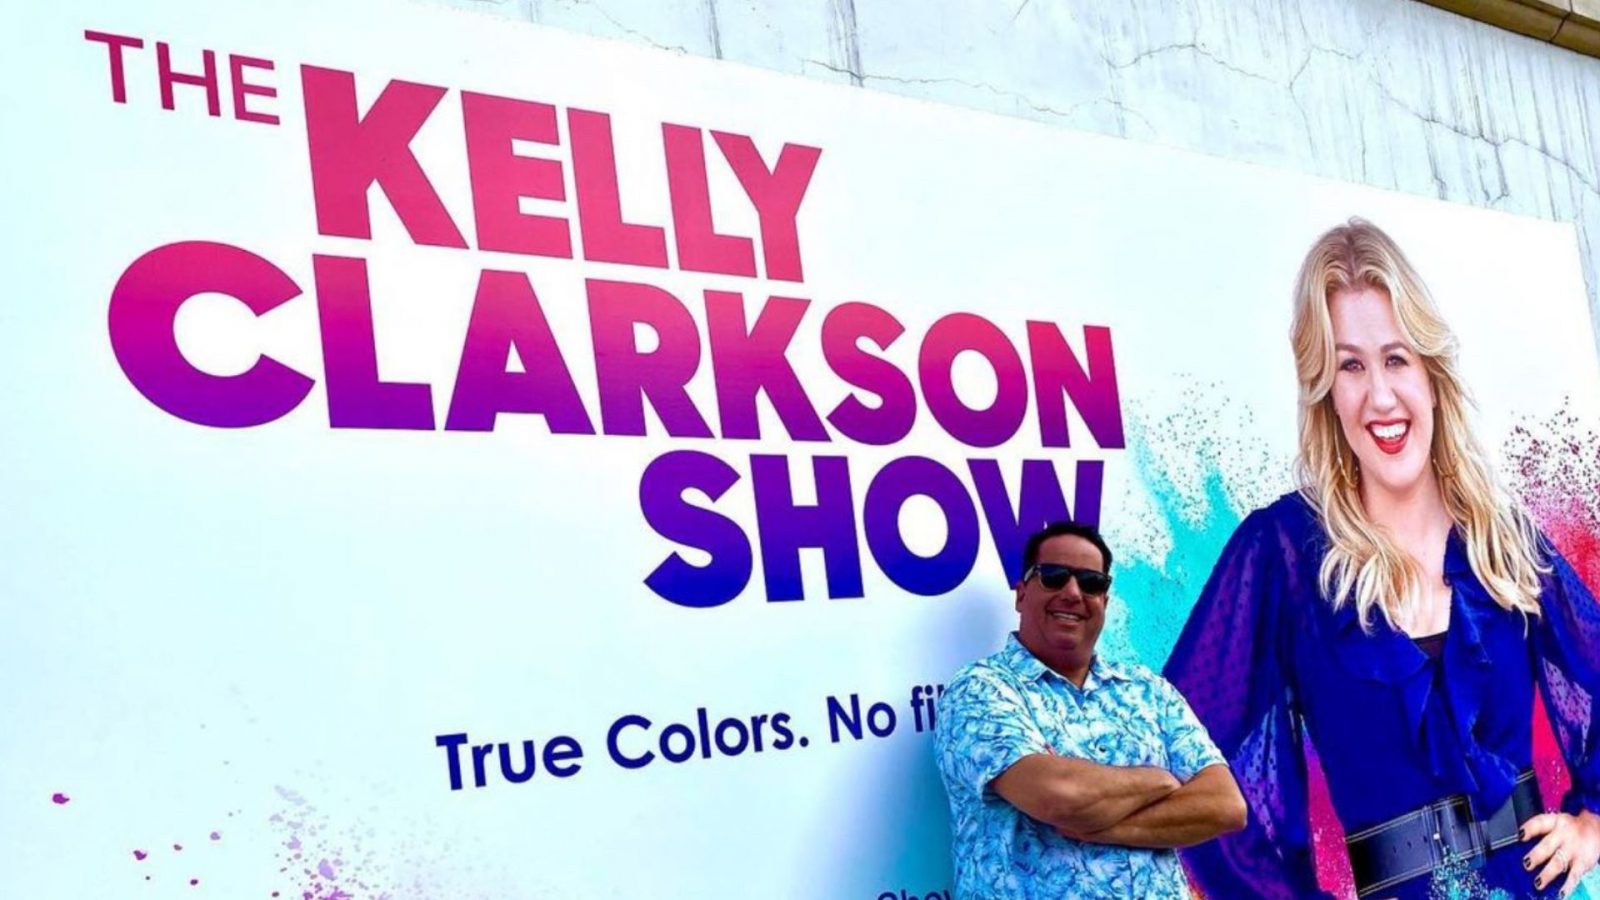 katz prior to an appearance on the kelly clarkson show